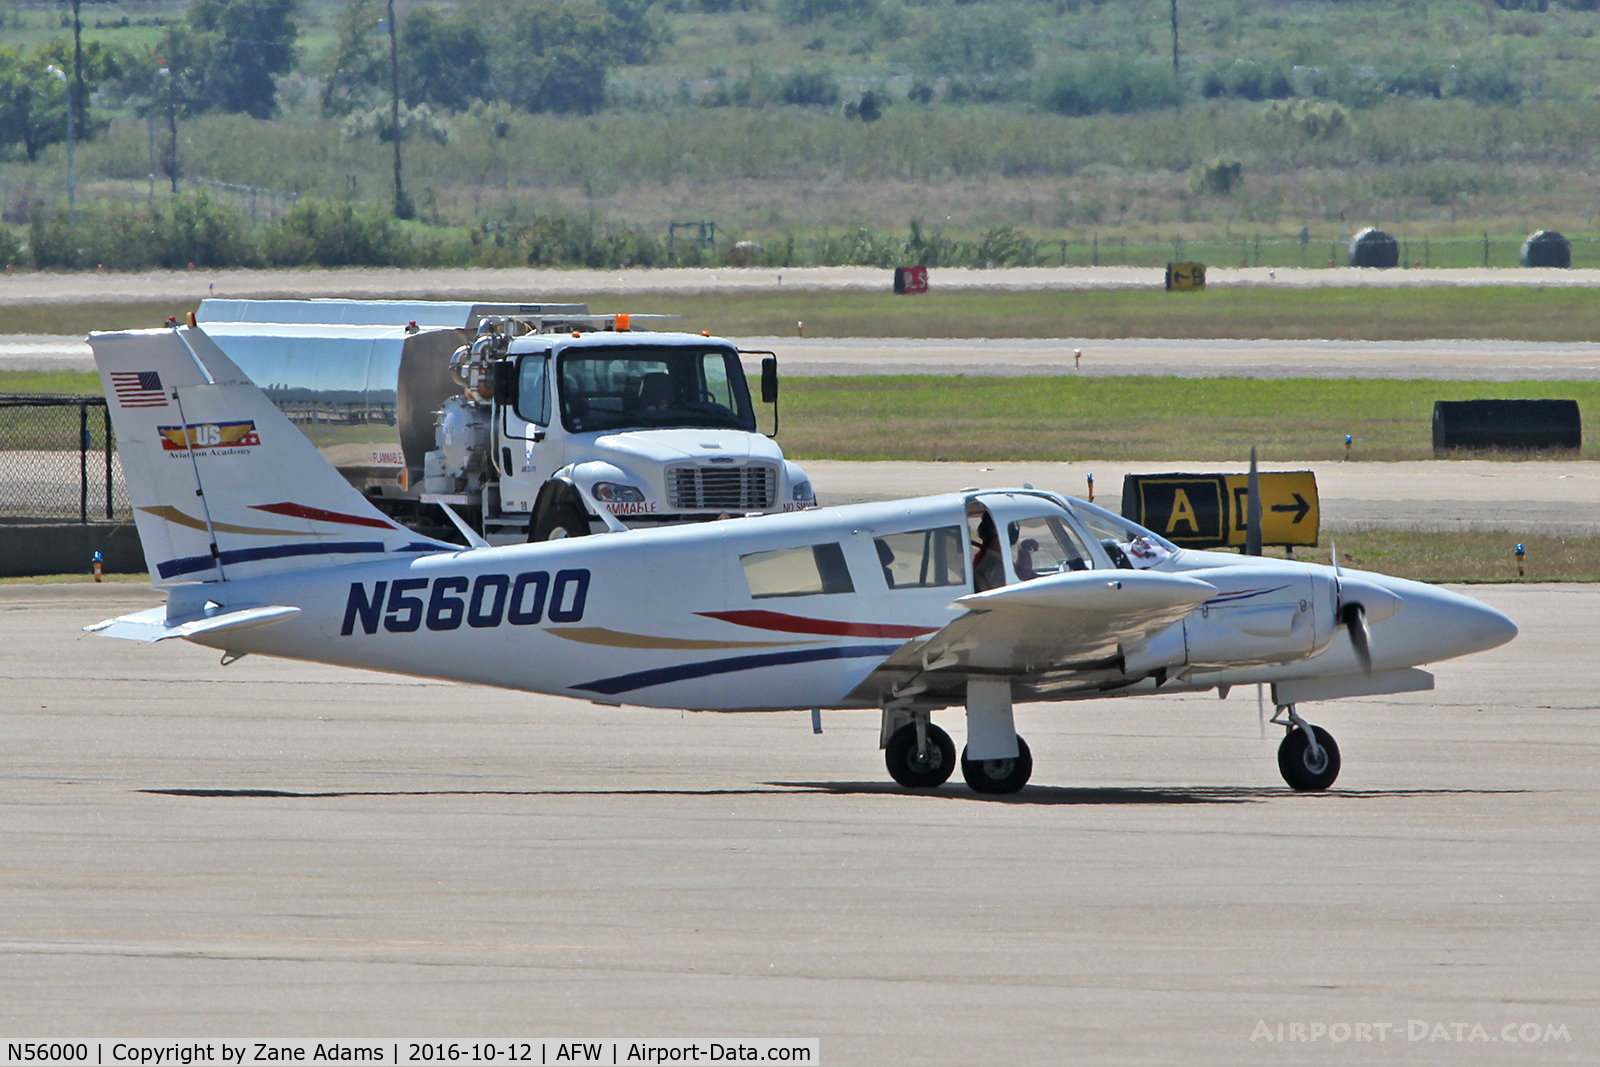 N56000, 1973 Piper PA-34-200 C/N 34-7350270, At Alliance Airport - Fort Worth, TX